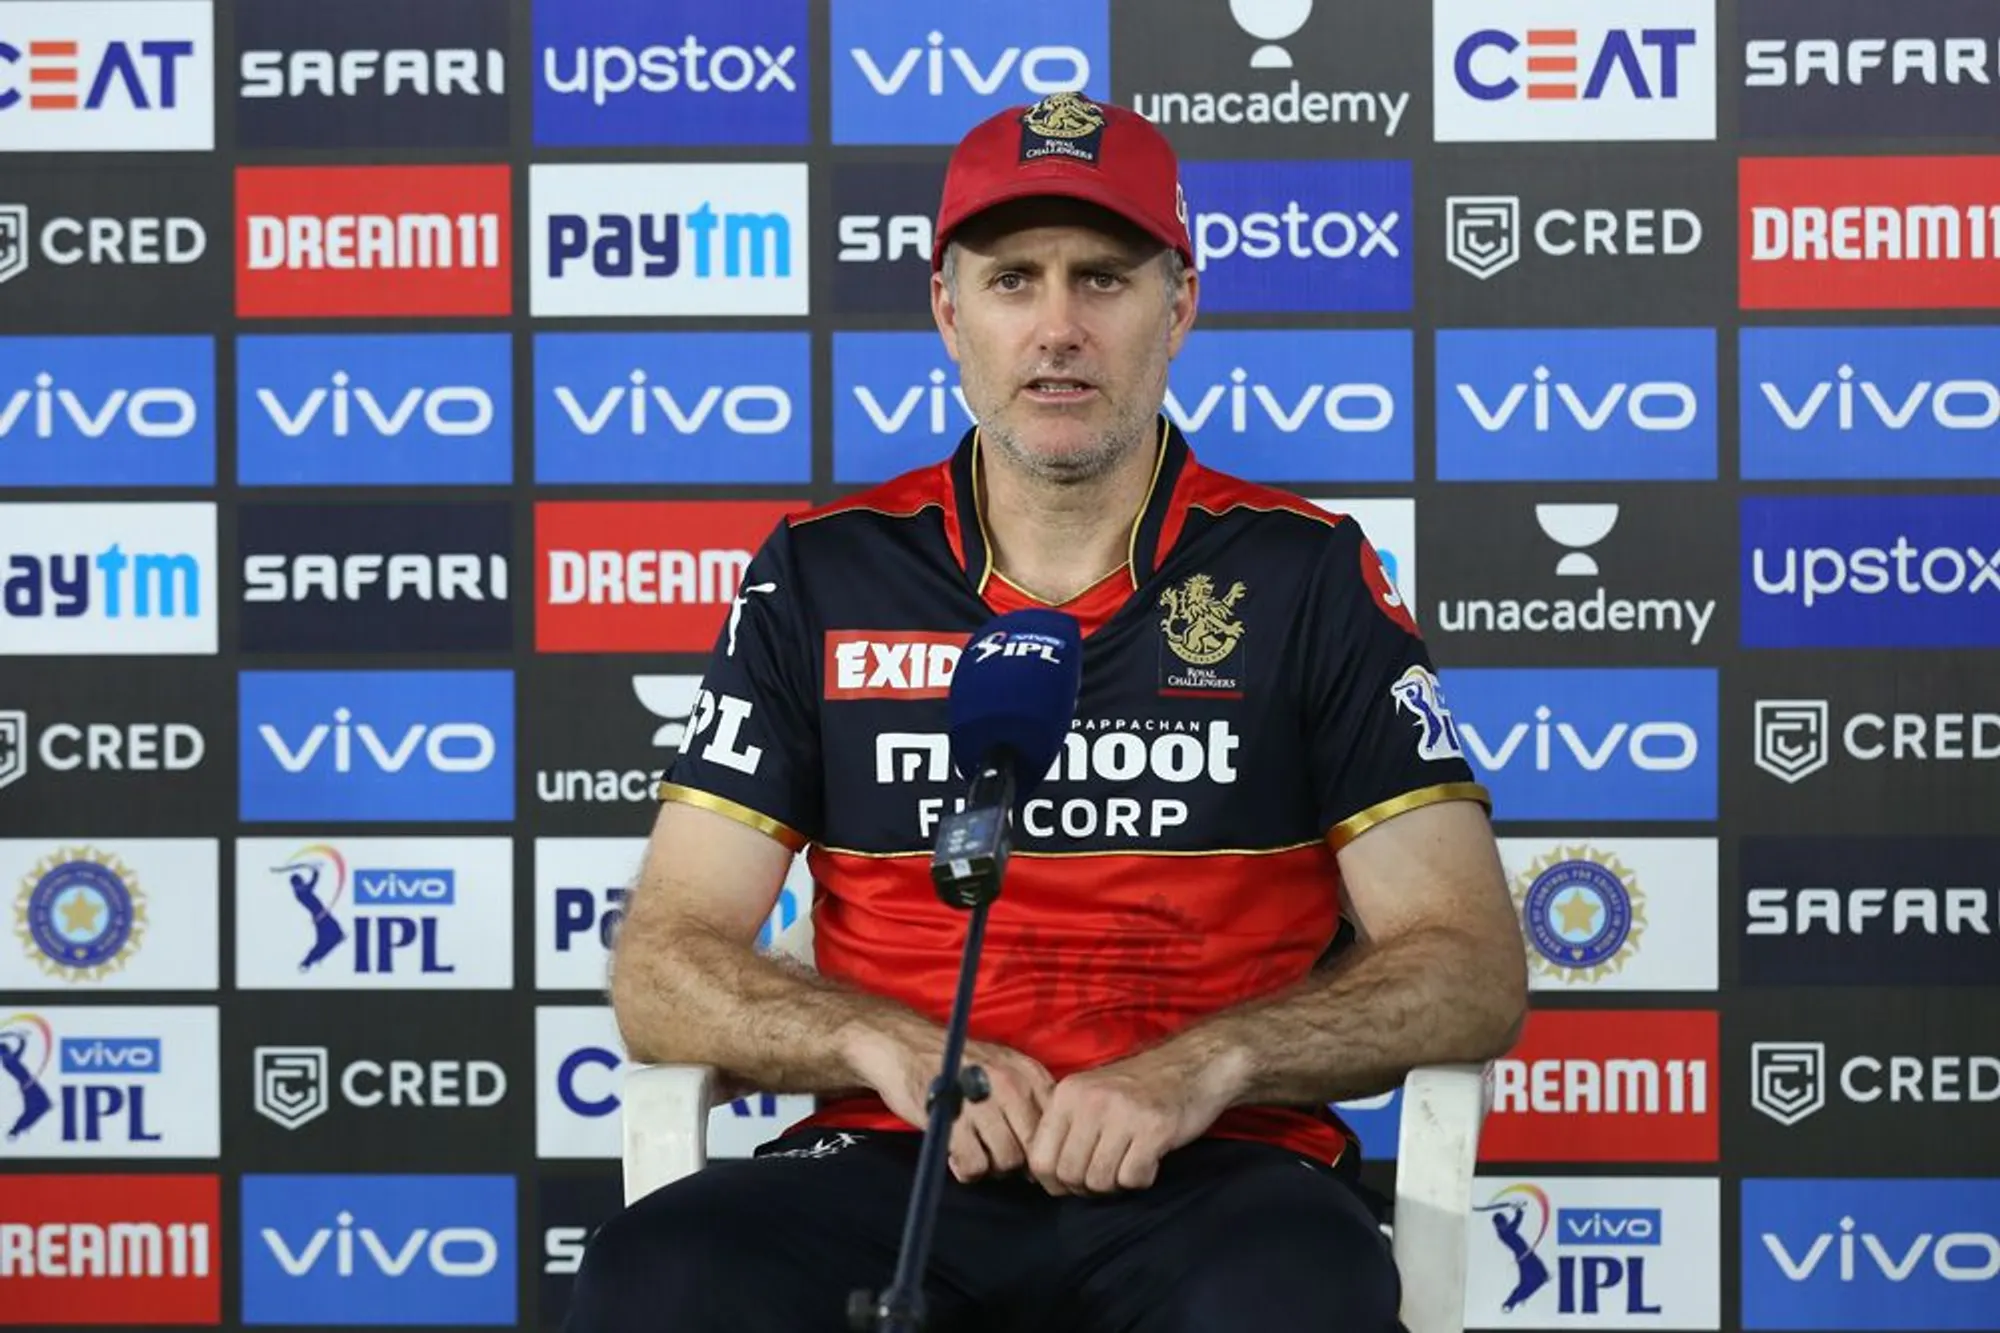 IPL 2021 | Simon Katich steps down as RCB coach with personal reasons, Mike Hesson to take over